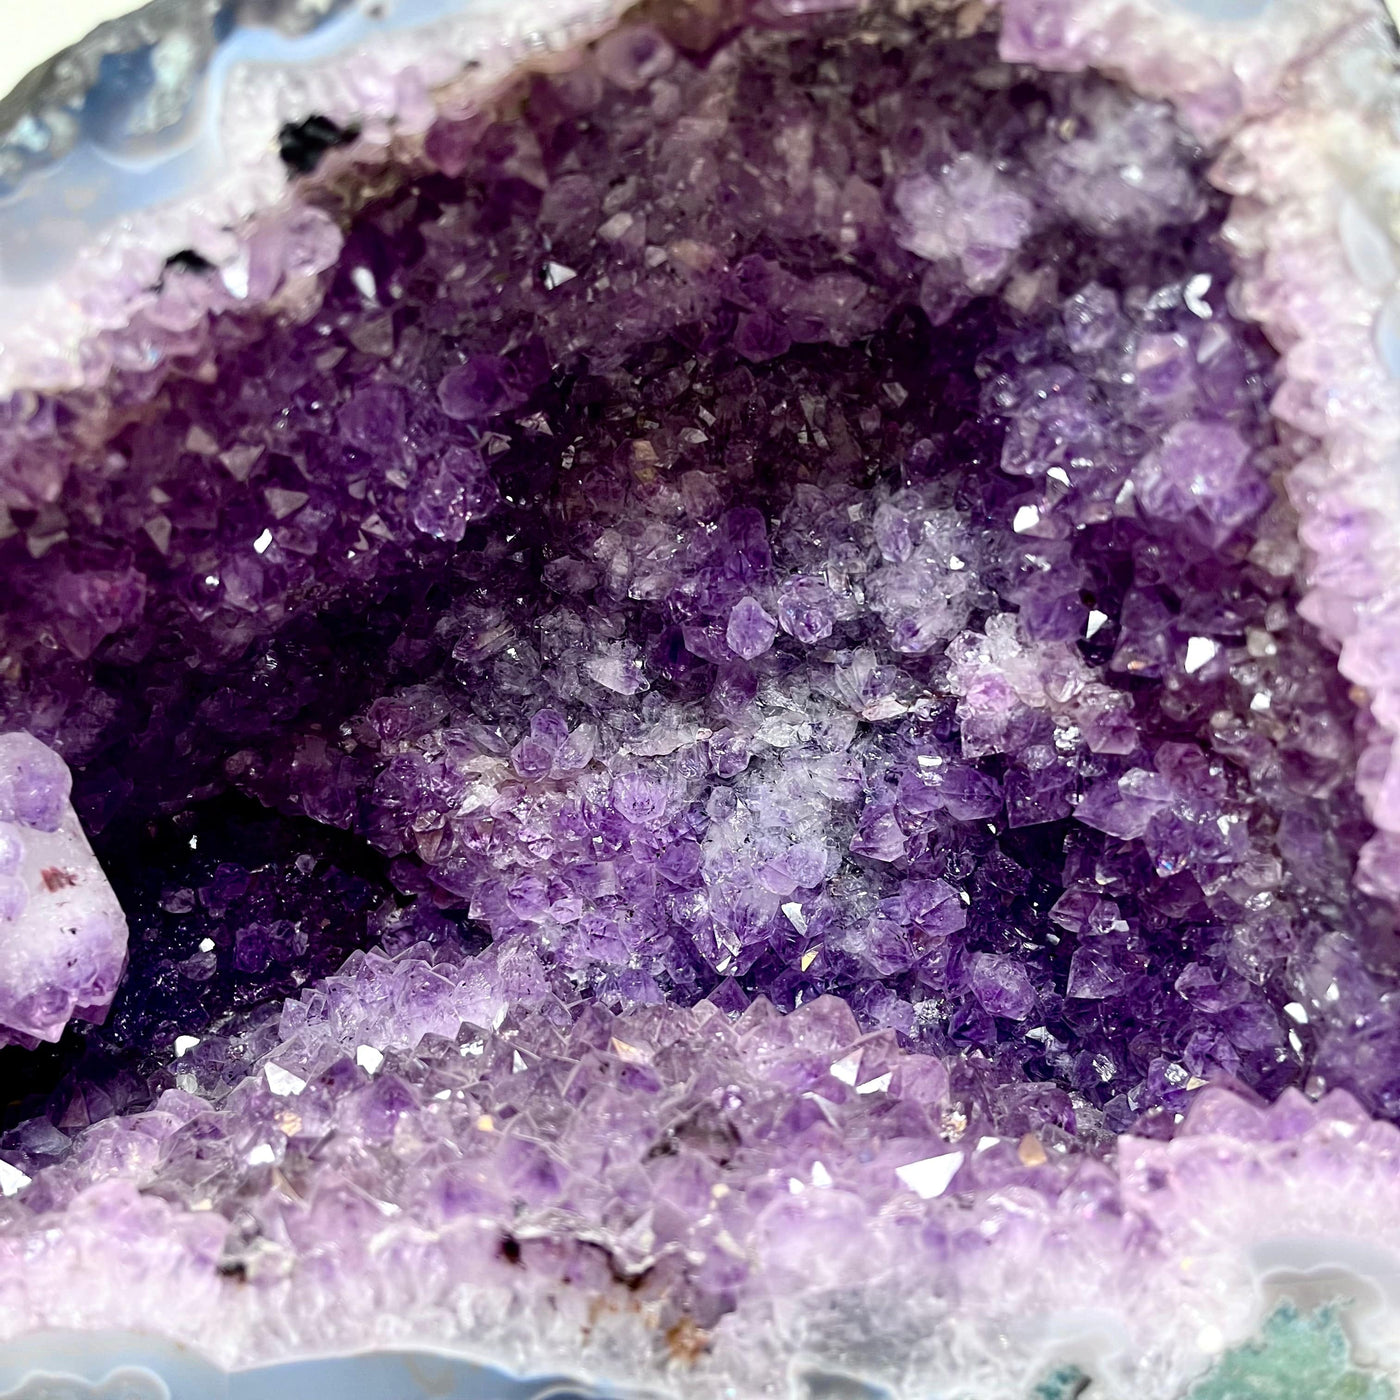 Up close view of the inner cluster formation of the Amethyst Cluster Geode Cave.